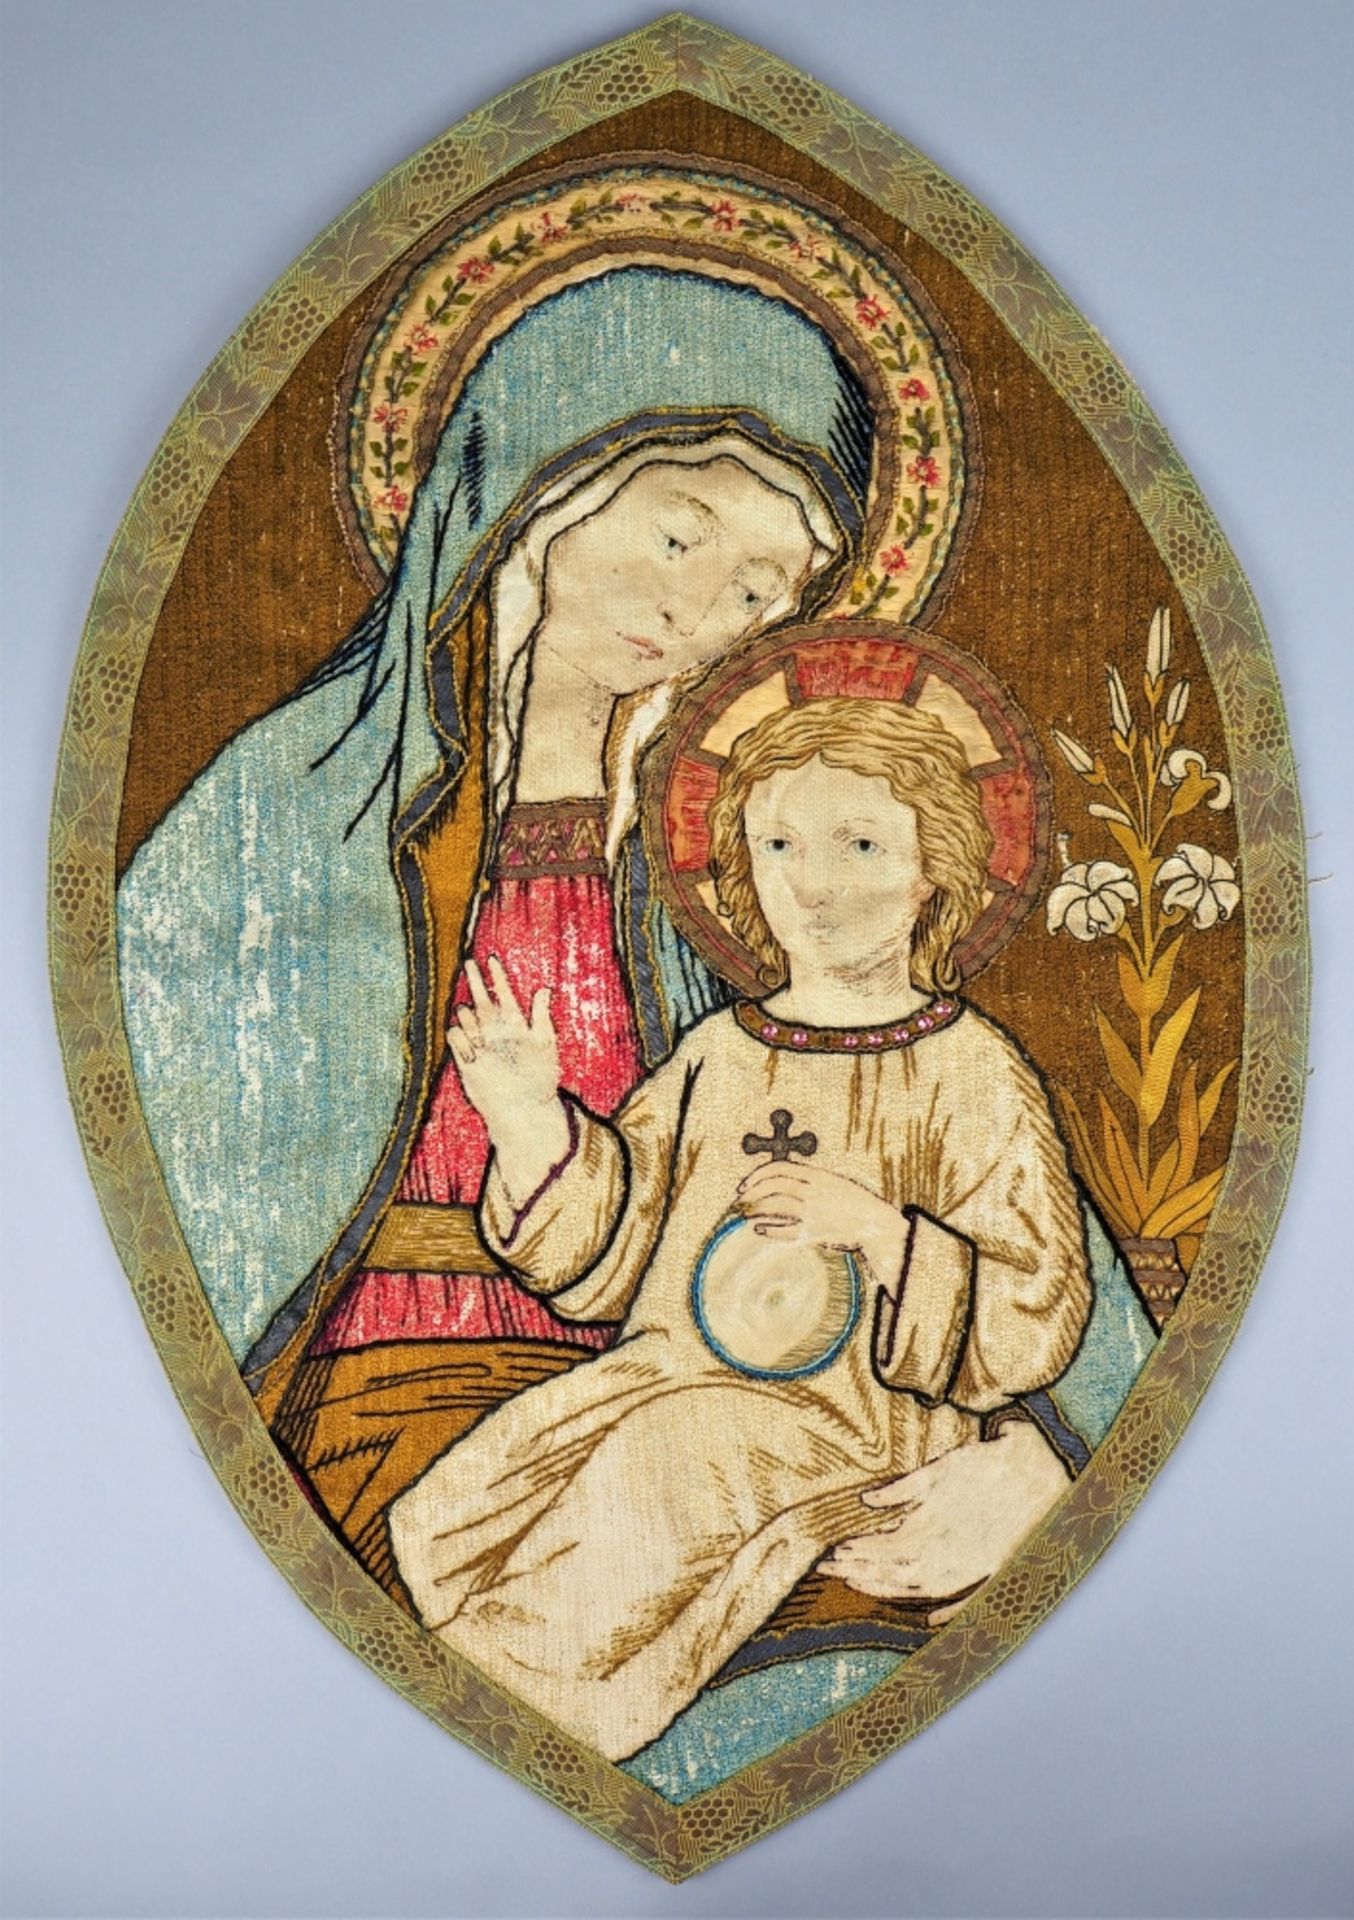 Embroidery Madonna with child, around 1900